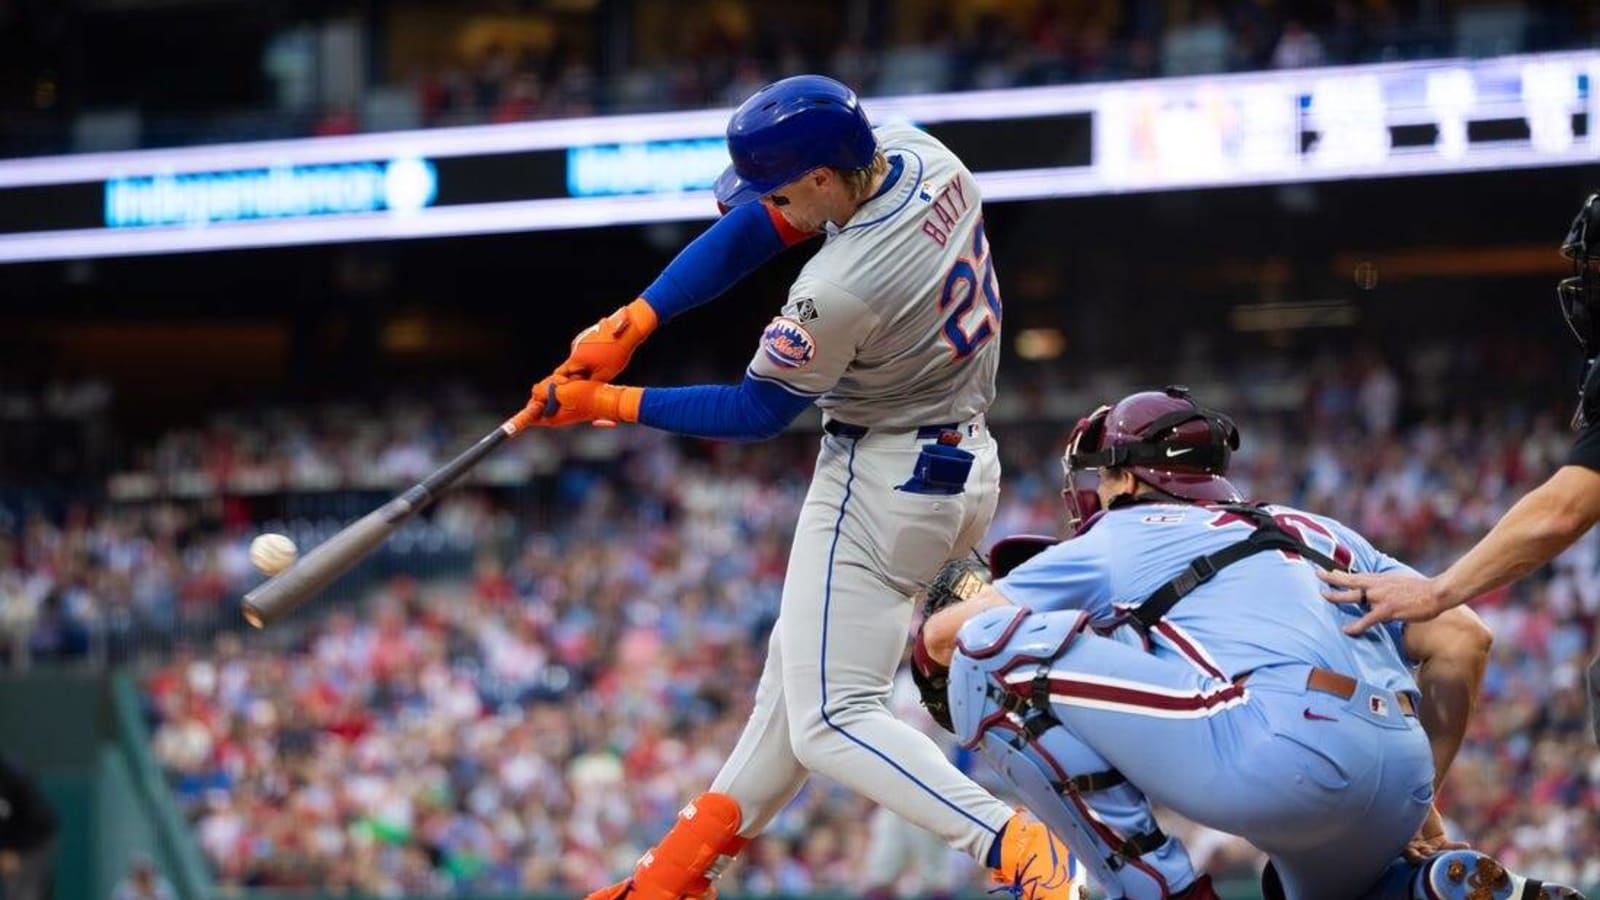 Mets finally push past Phillies in 11th inning